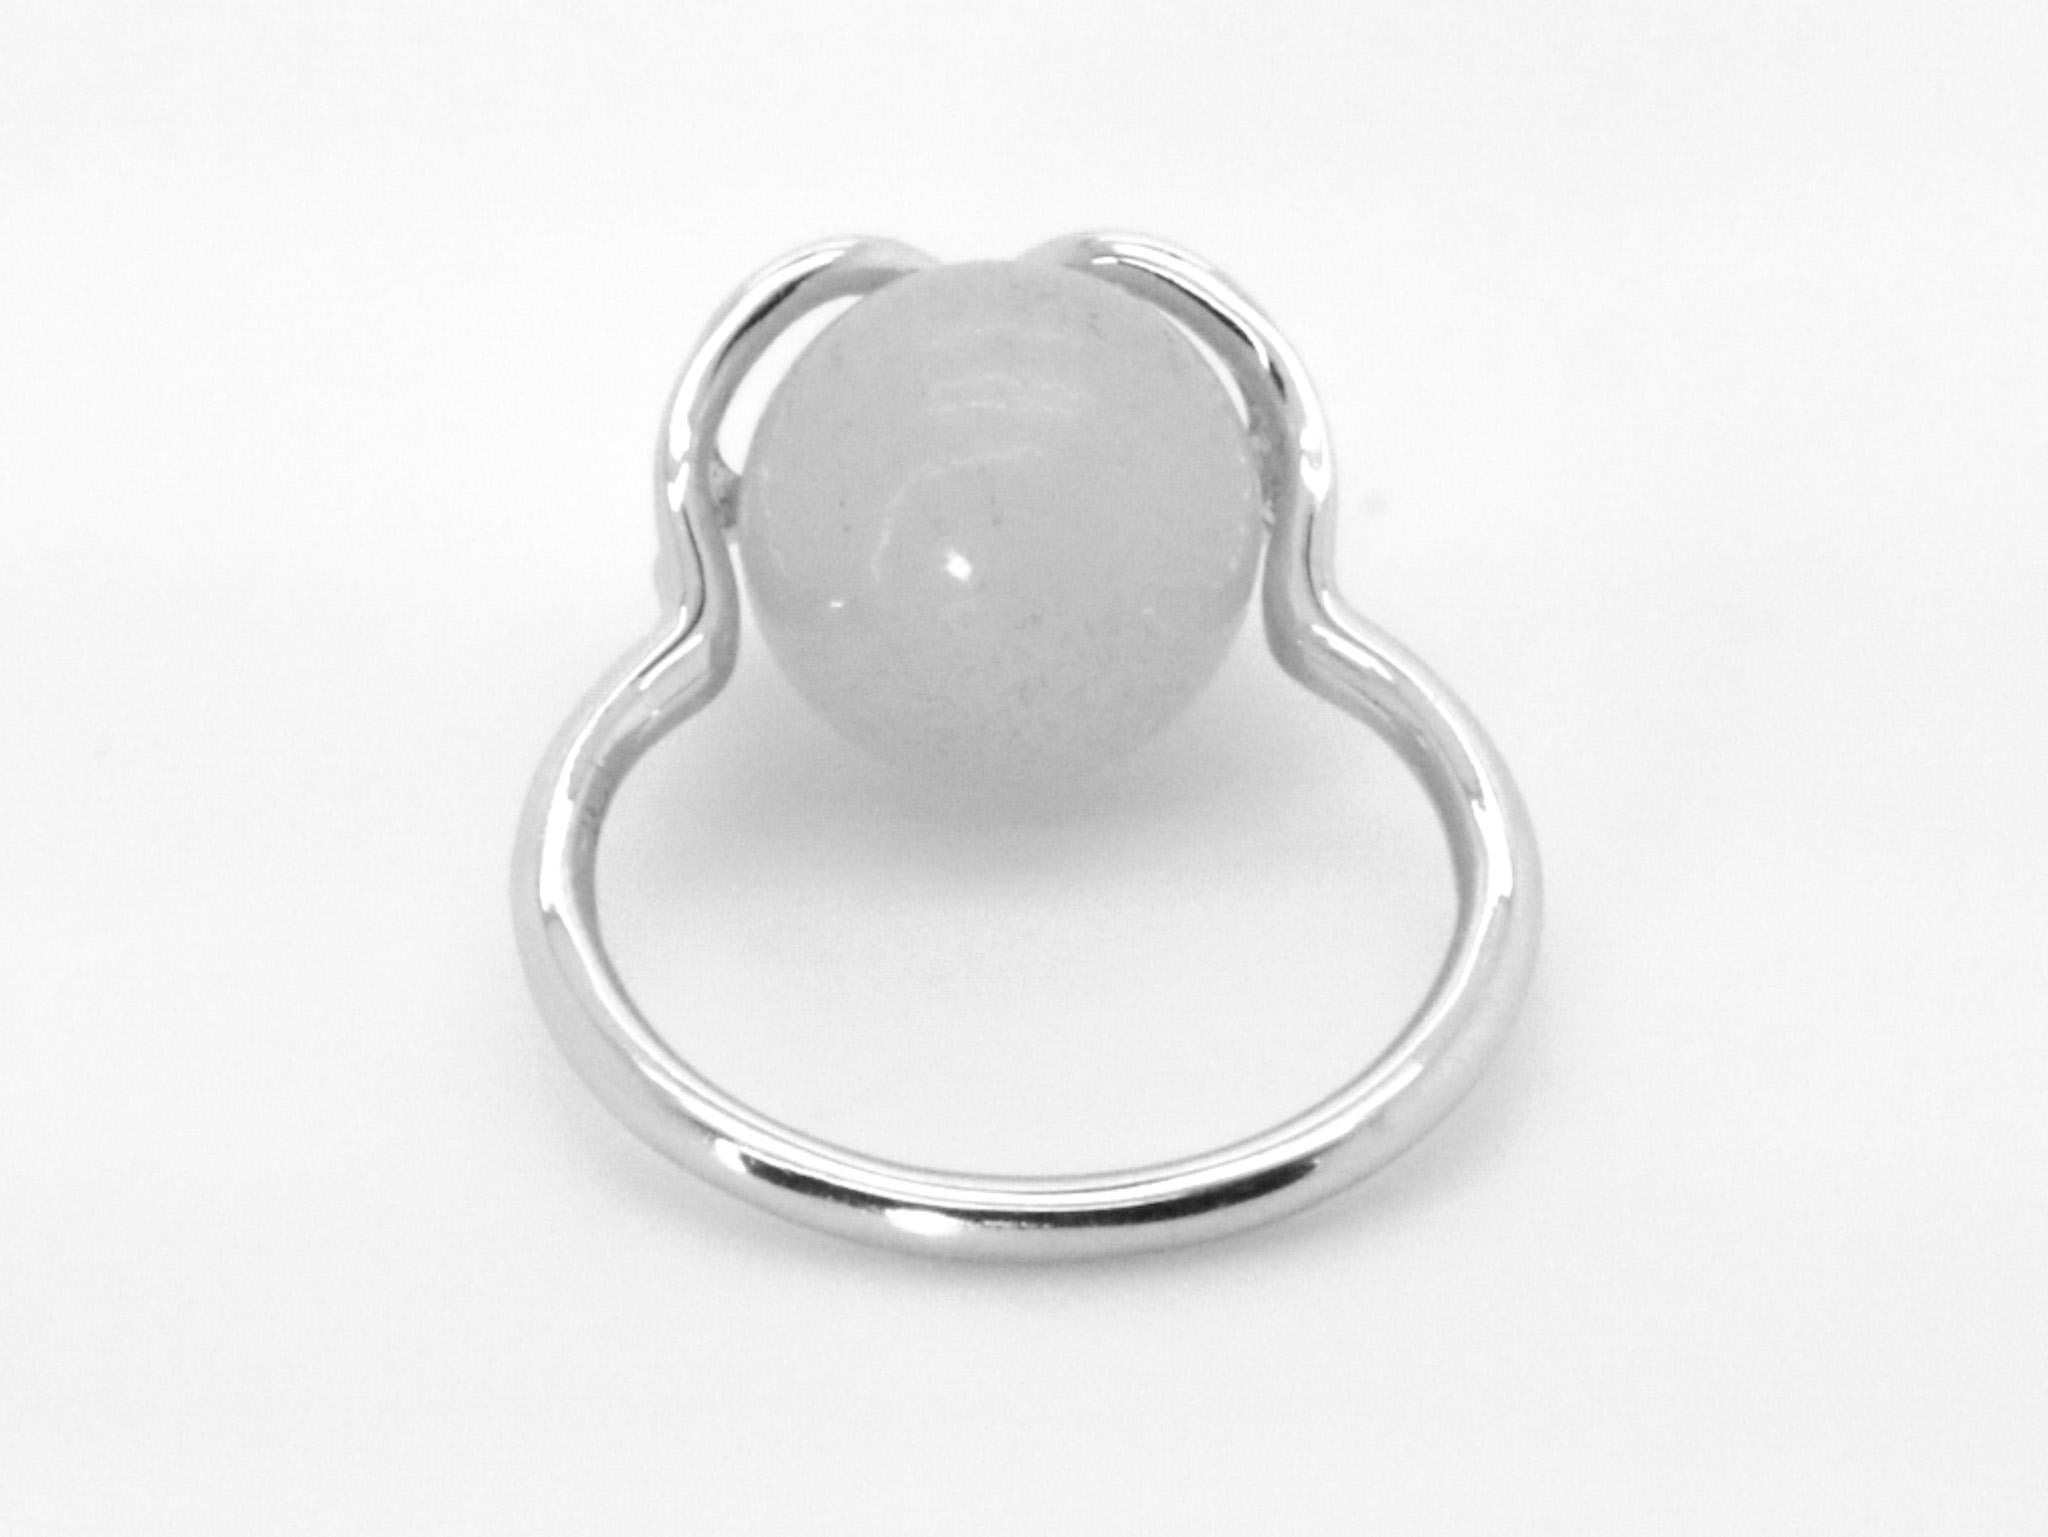 The Infinite Magic of Gems cocktail ring is designed with the Infinity Symbol and thought featuring a  White Jade, the gems are interchangeable. It features an half drilled ball cut White Jade around 8.00 carats, diameter 10.35 mm. The total weight